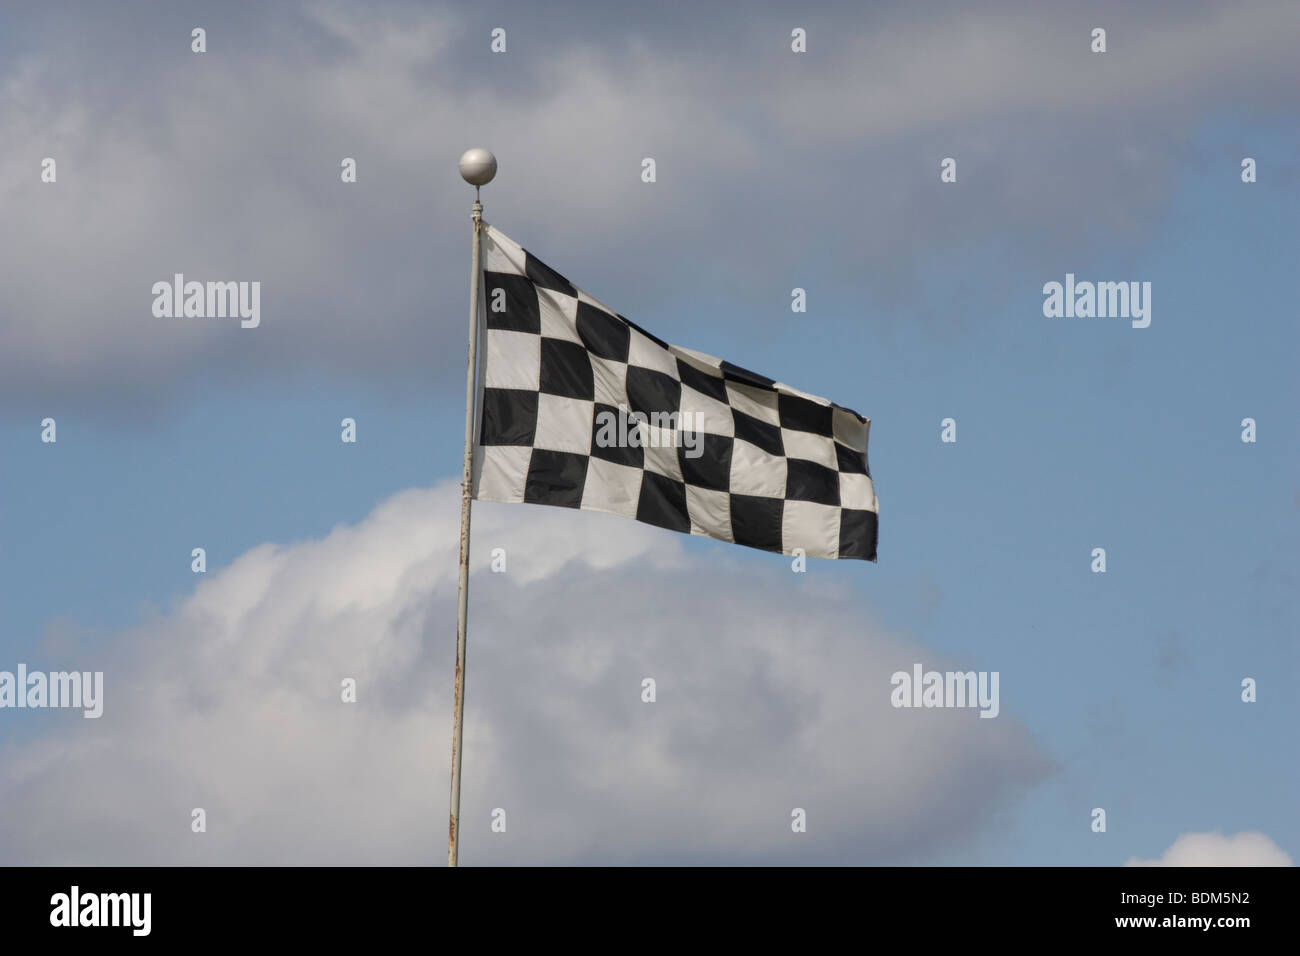 Checkered flag blowing in the breeze. Stock Photo